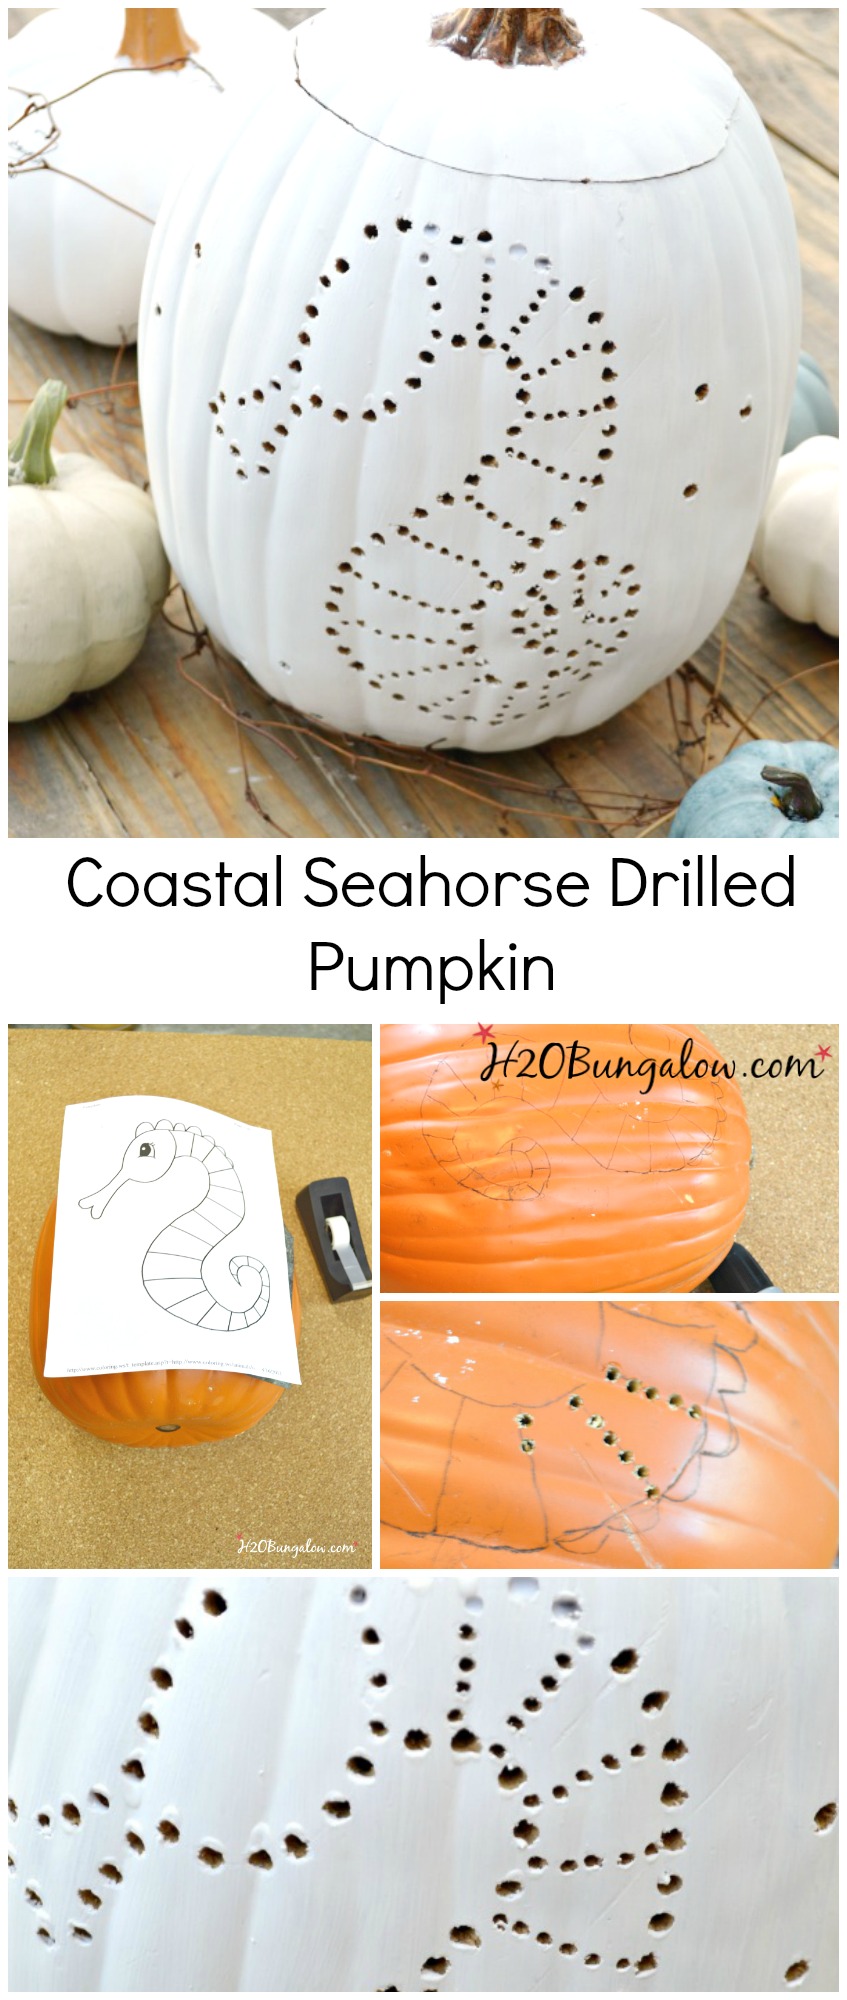 How to drill a pumpkin.  Use a simple drill and pattern to make a fall decor pumpkin. Get a free pattern to drill a pumpkin #pumpkin #pumkindecor #fallDIY #h2obungalow